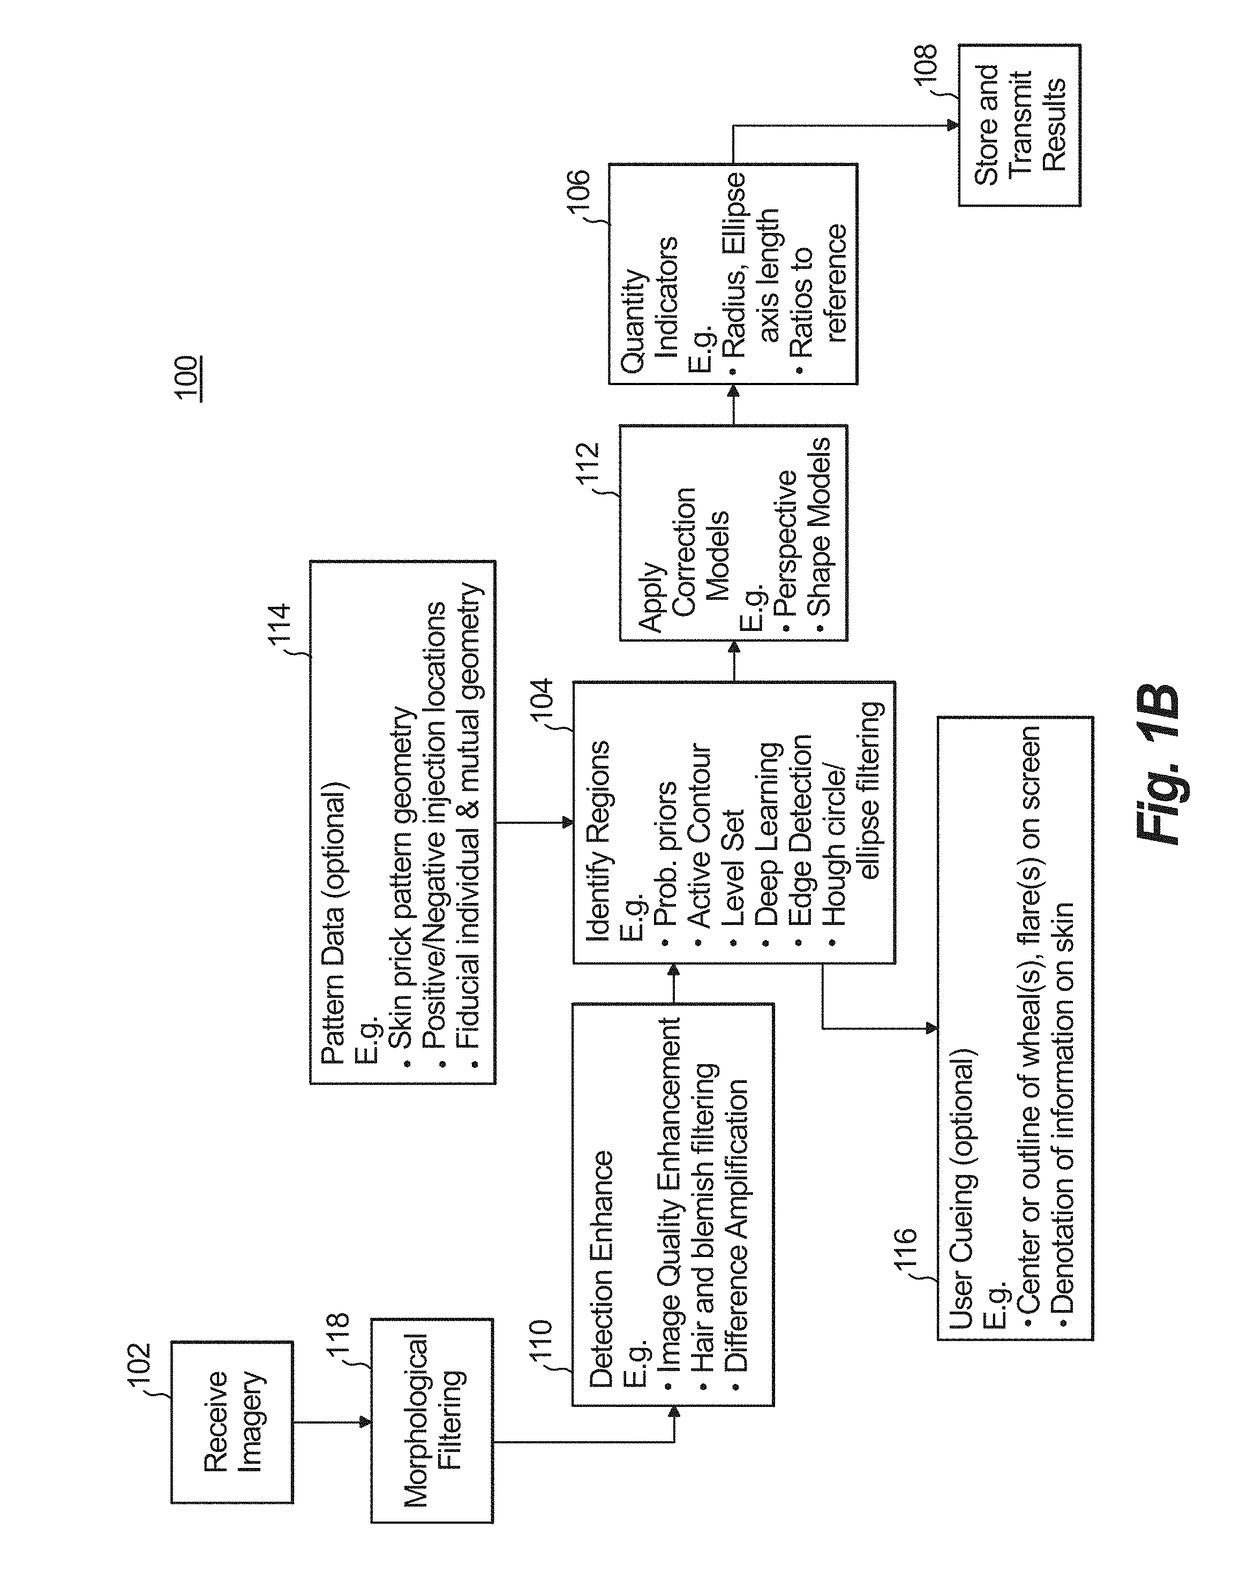 Systems and methods for image metrology and user interfaces